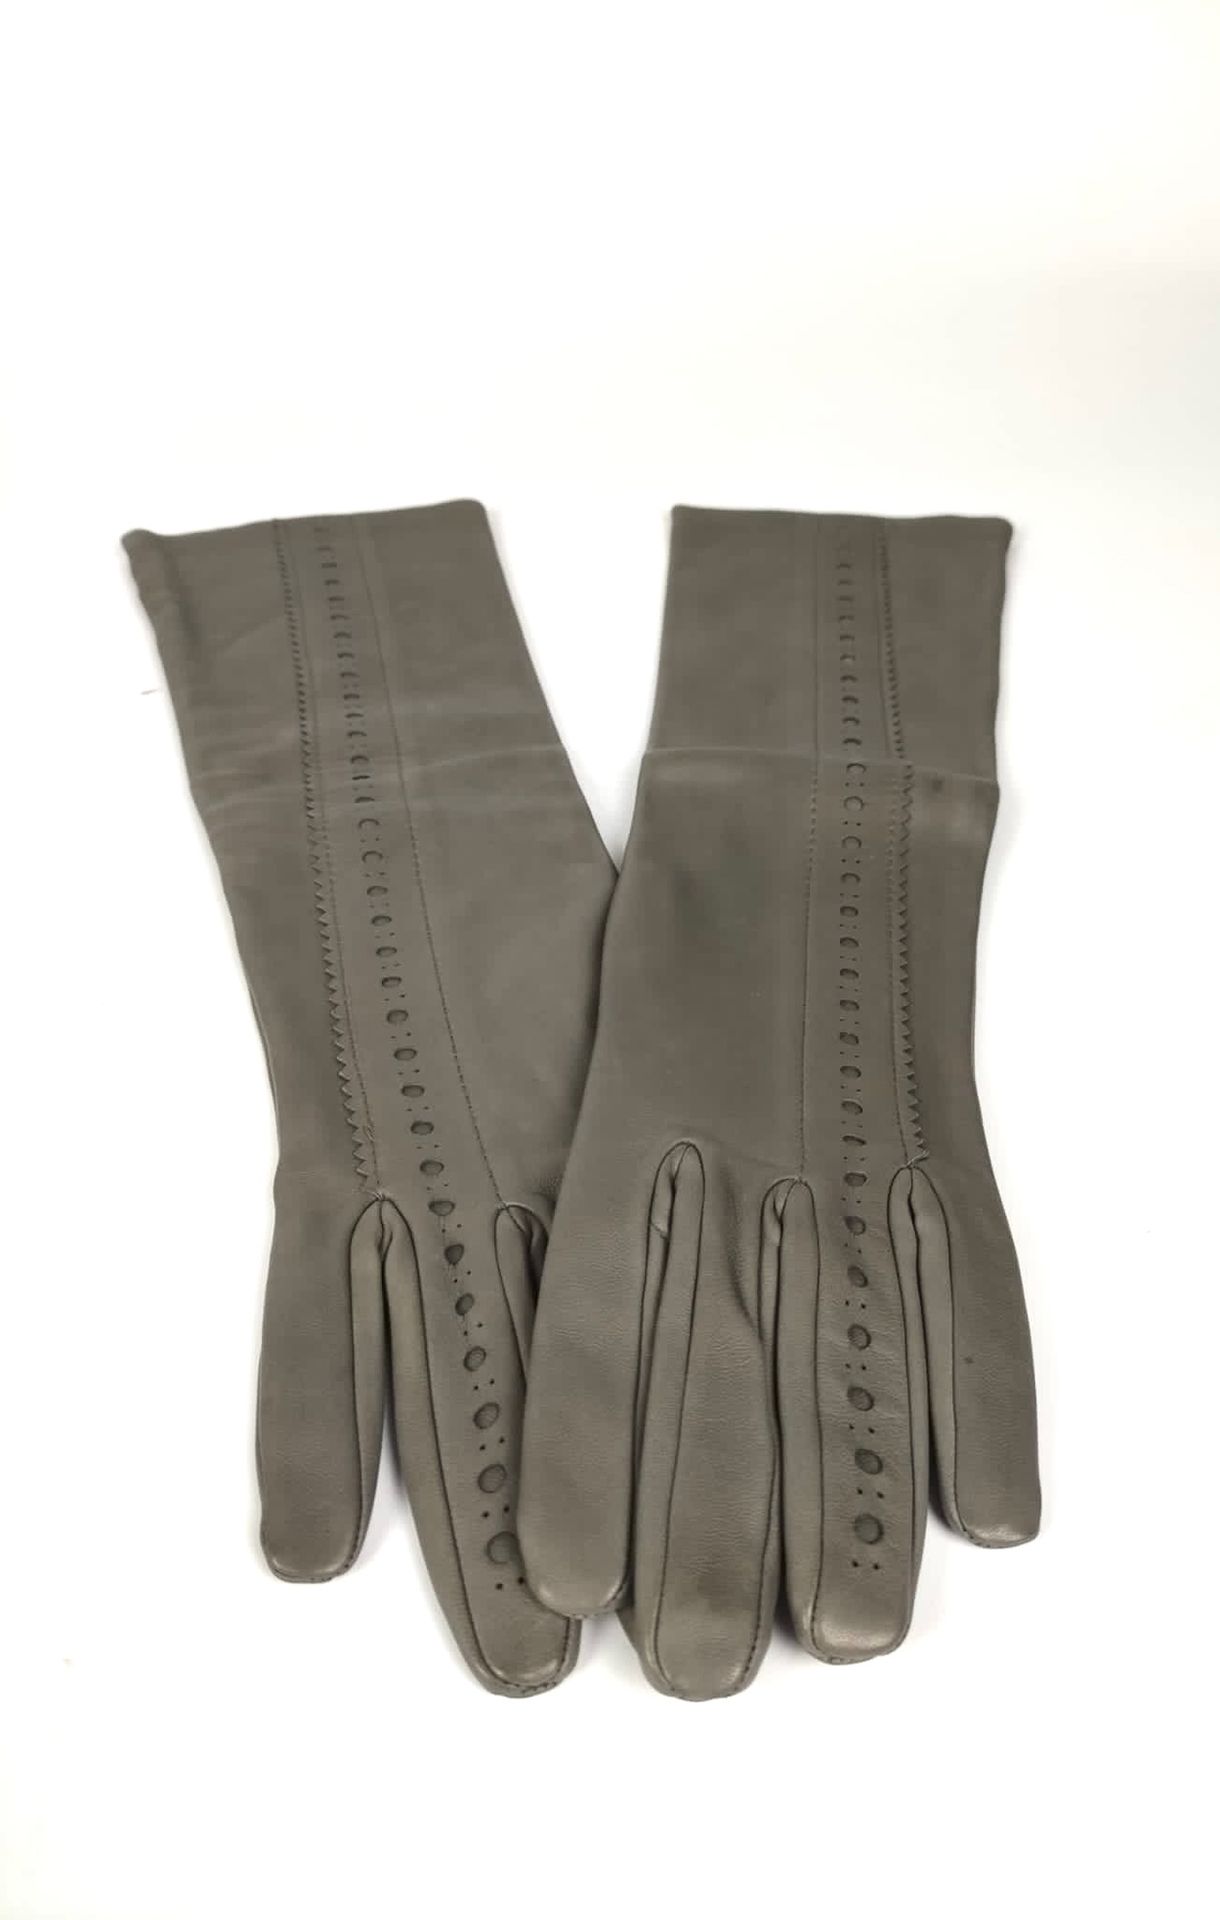 Null HERMES Pair of long gloves in calfskin. Size 7,5 (Very good condition).